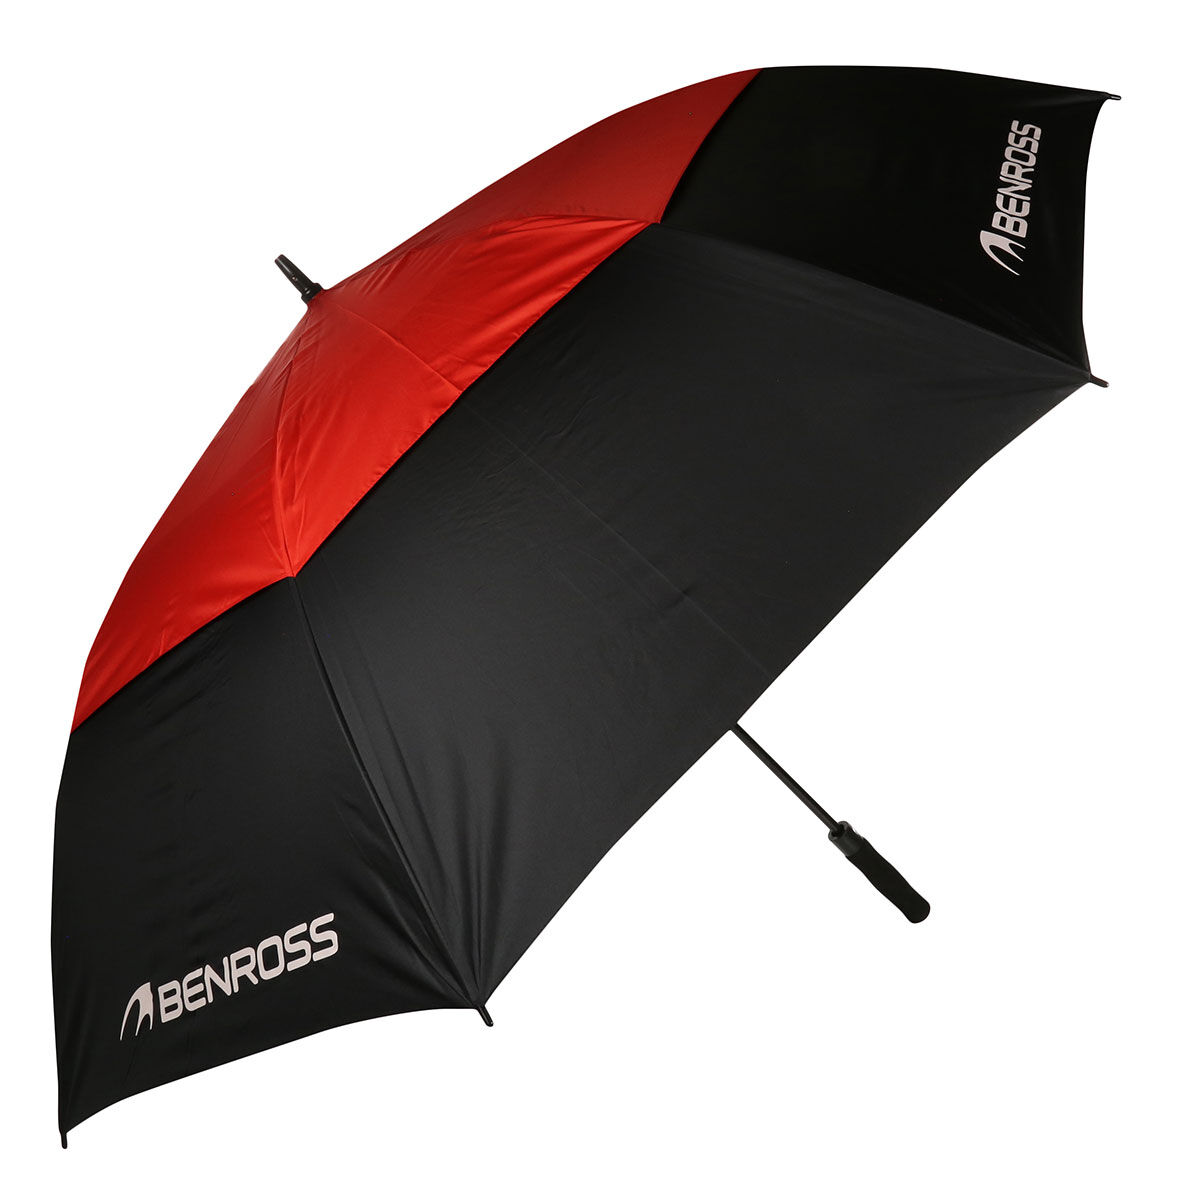 Benross Black And Red Lightweight Plain Double Canopy Golf Umbrella, Size: 68", 68 inches | American Golf